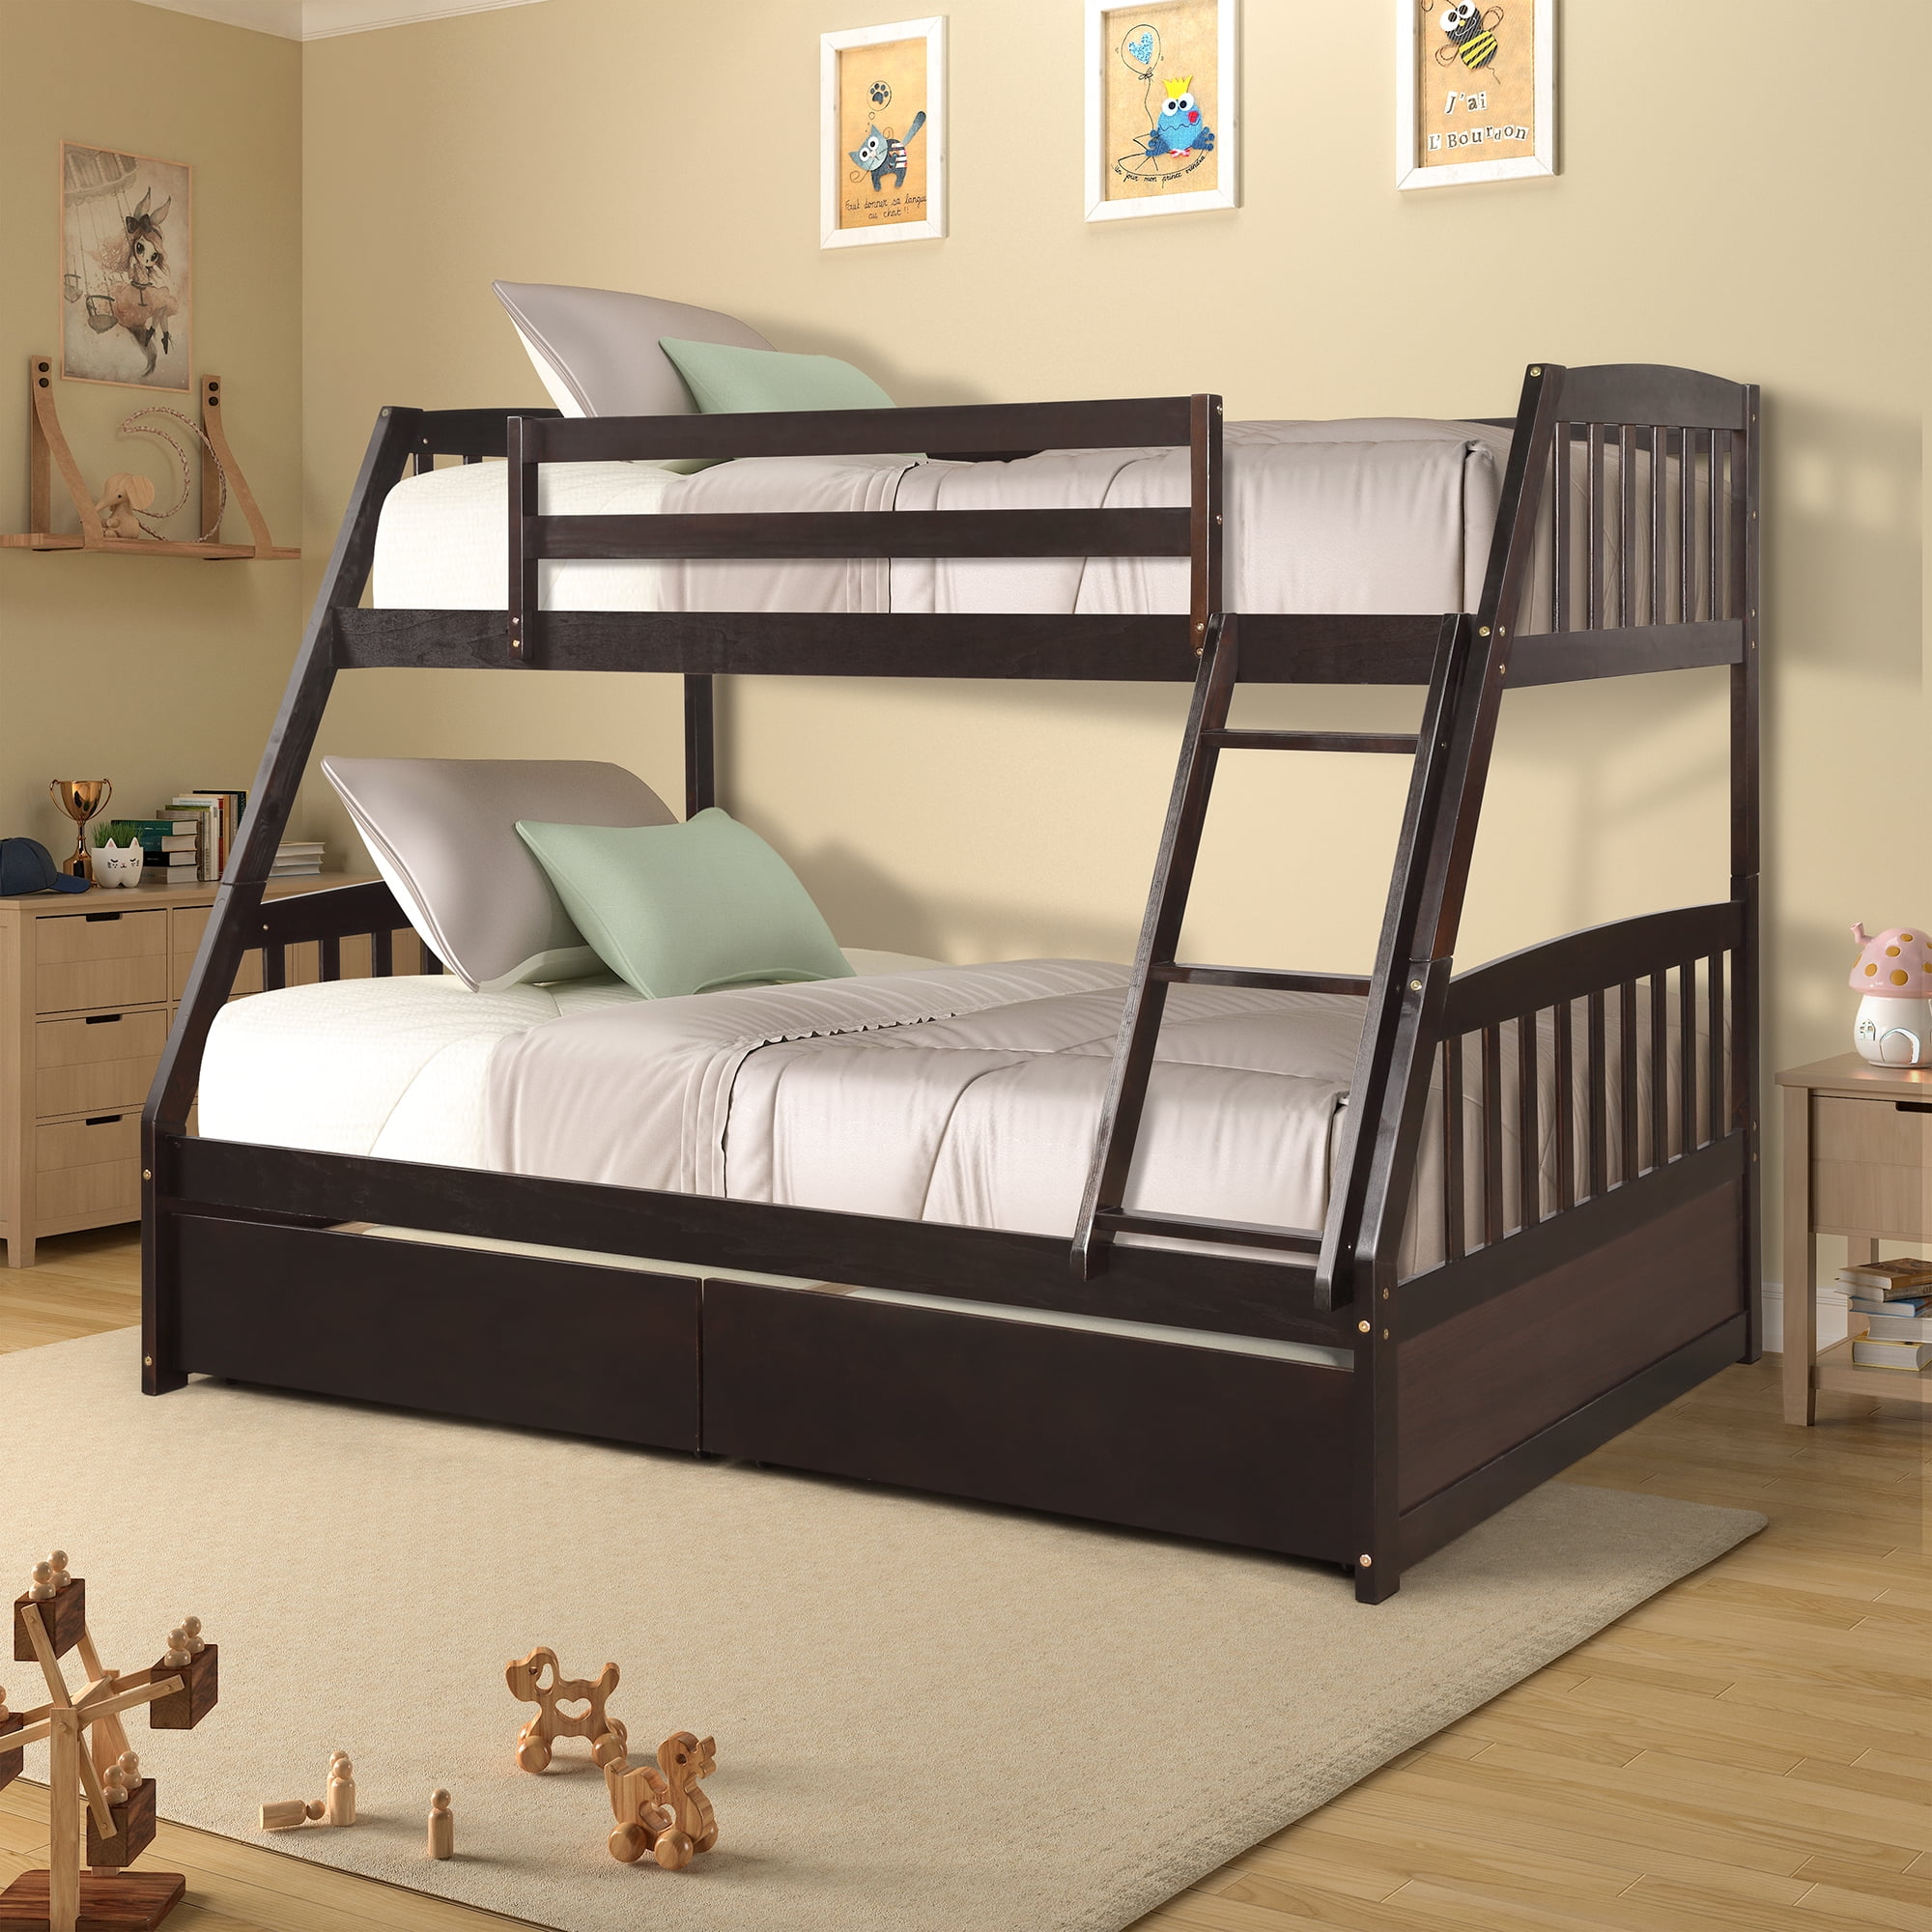 Euroco Twin Over Full Bunk Bed With, Warner Espresso Twin Over Full Bunk Bed With Stairs